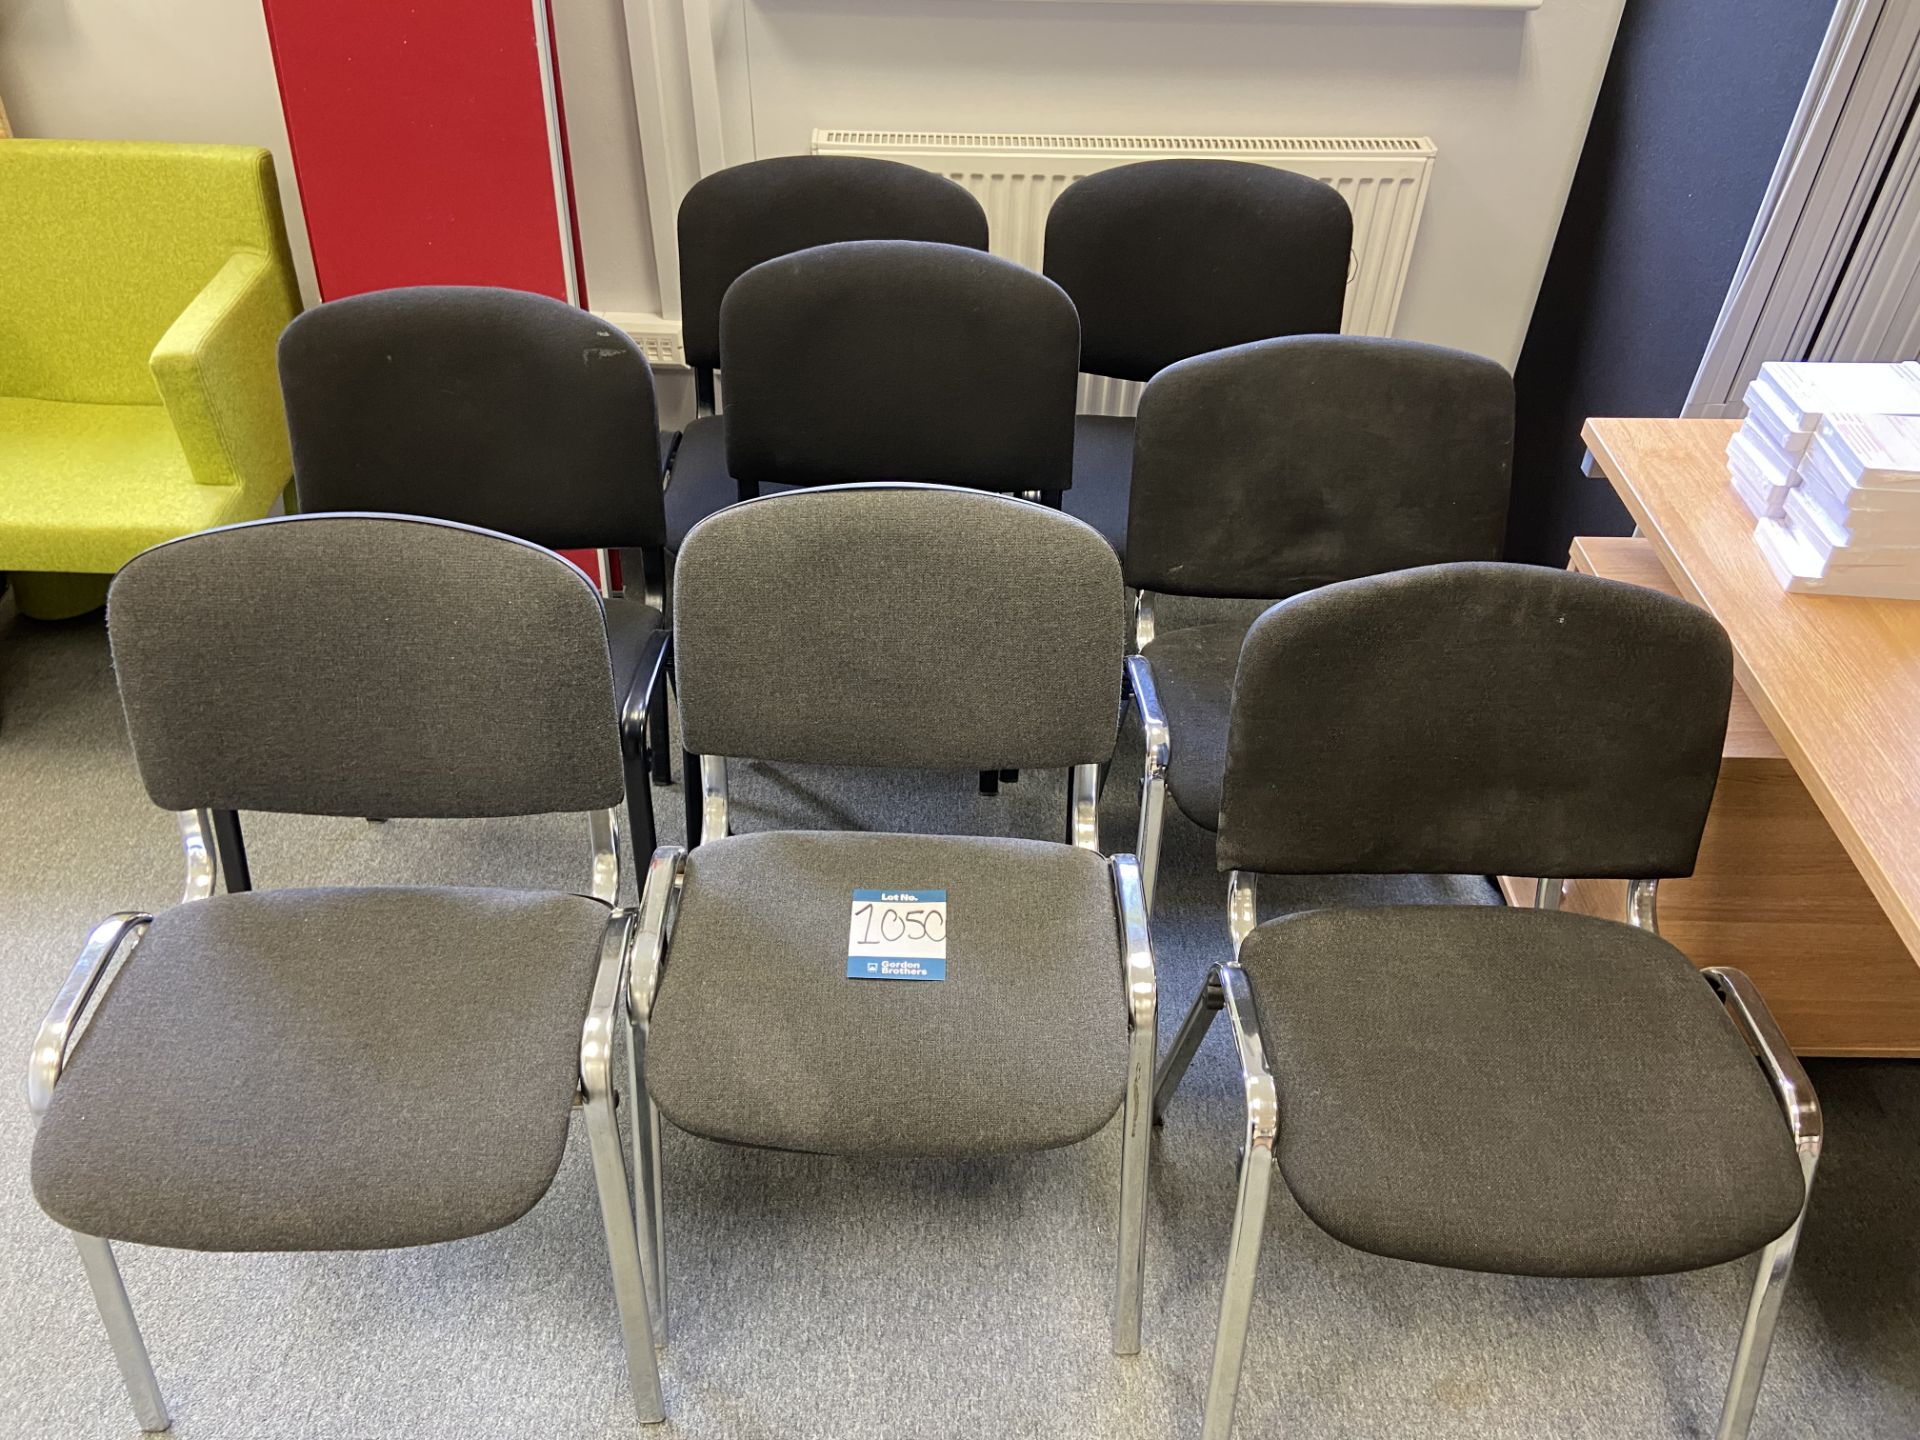 Lot comprisng: eight meeting room chairs